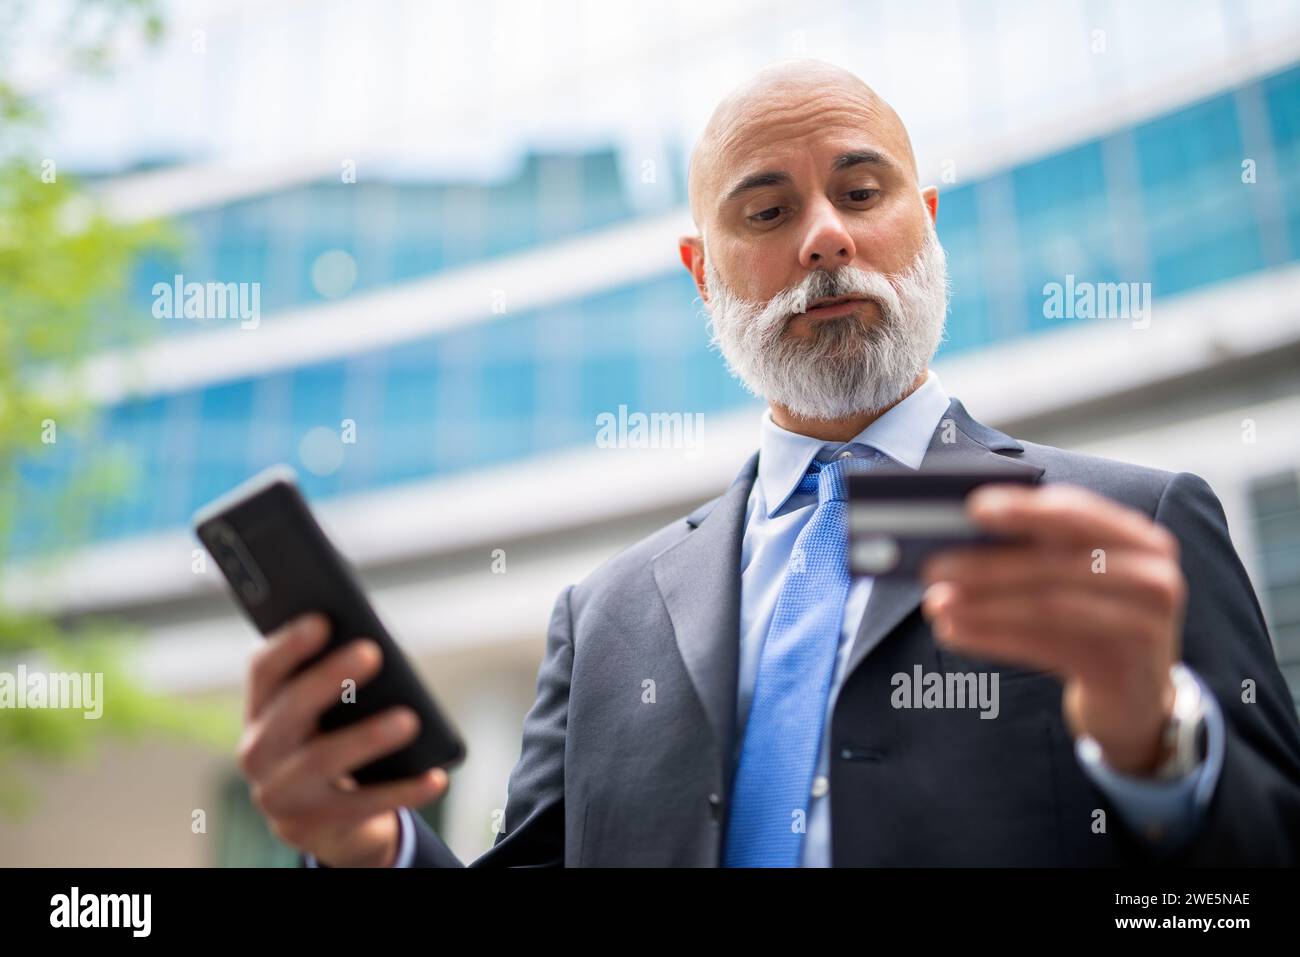 Businessman using his credit card and his cellphone, online purchase concept Stock Photo